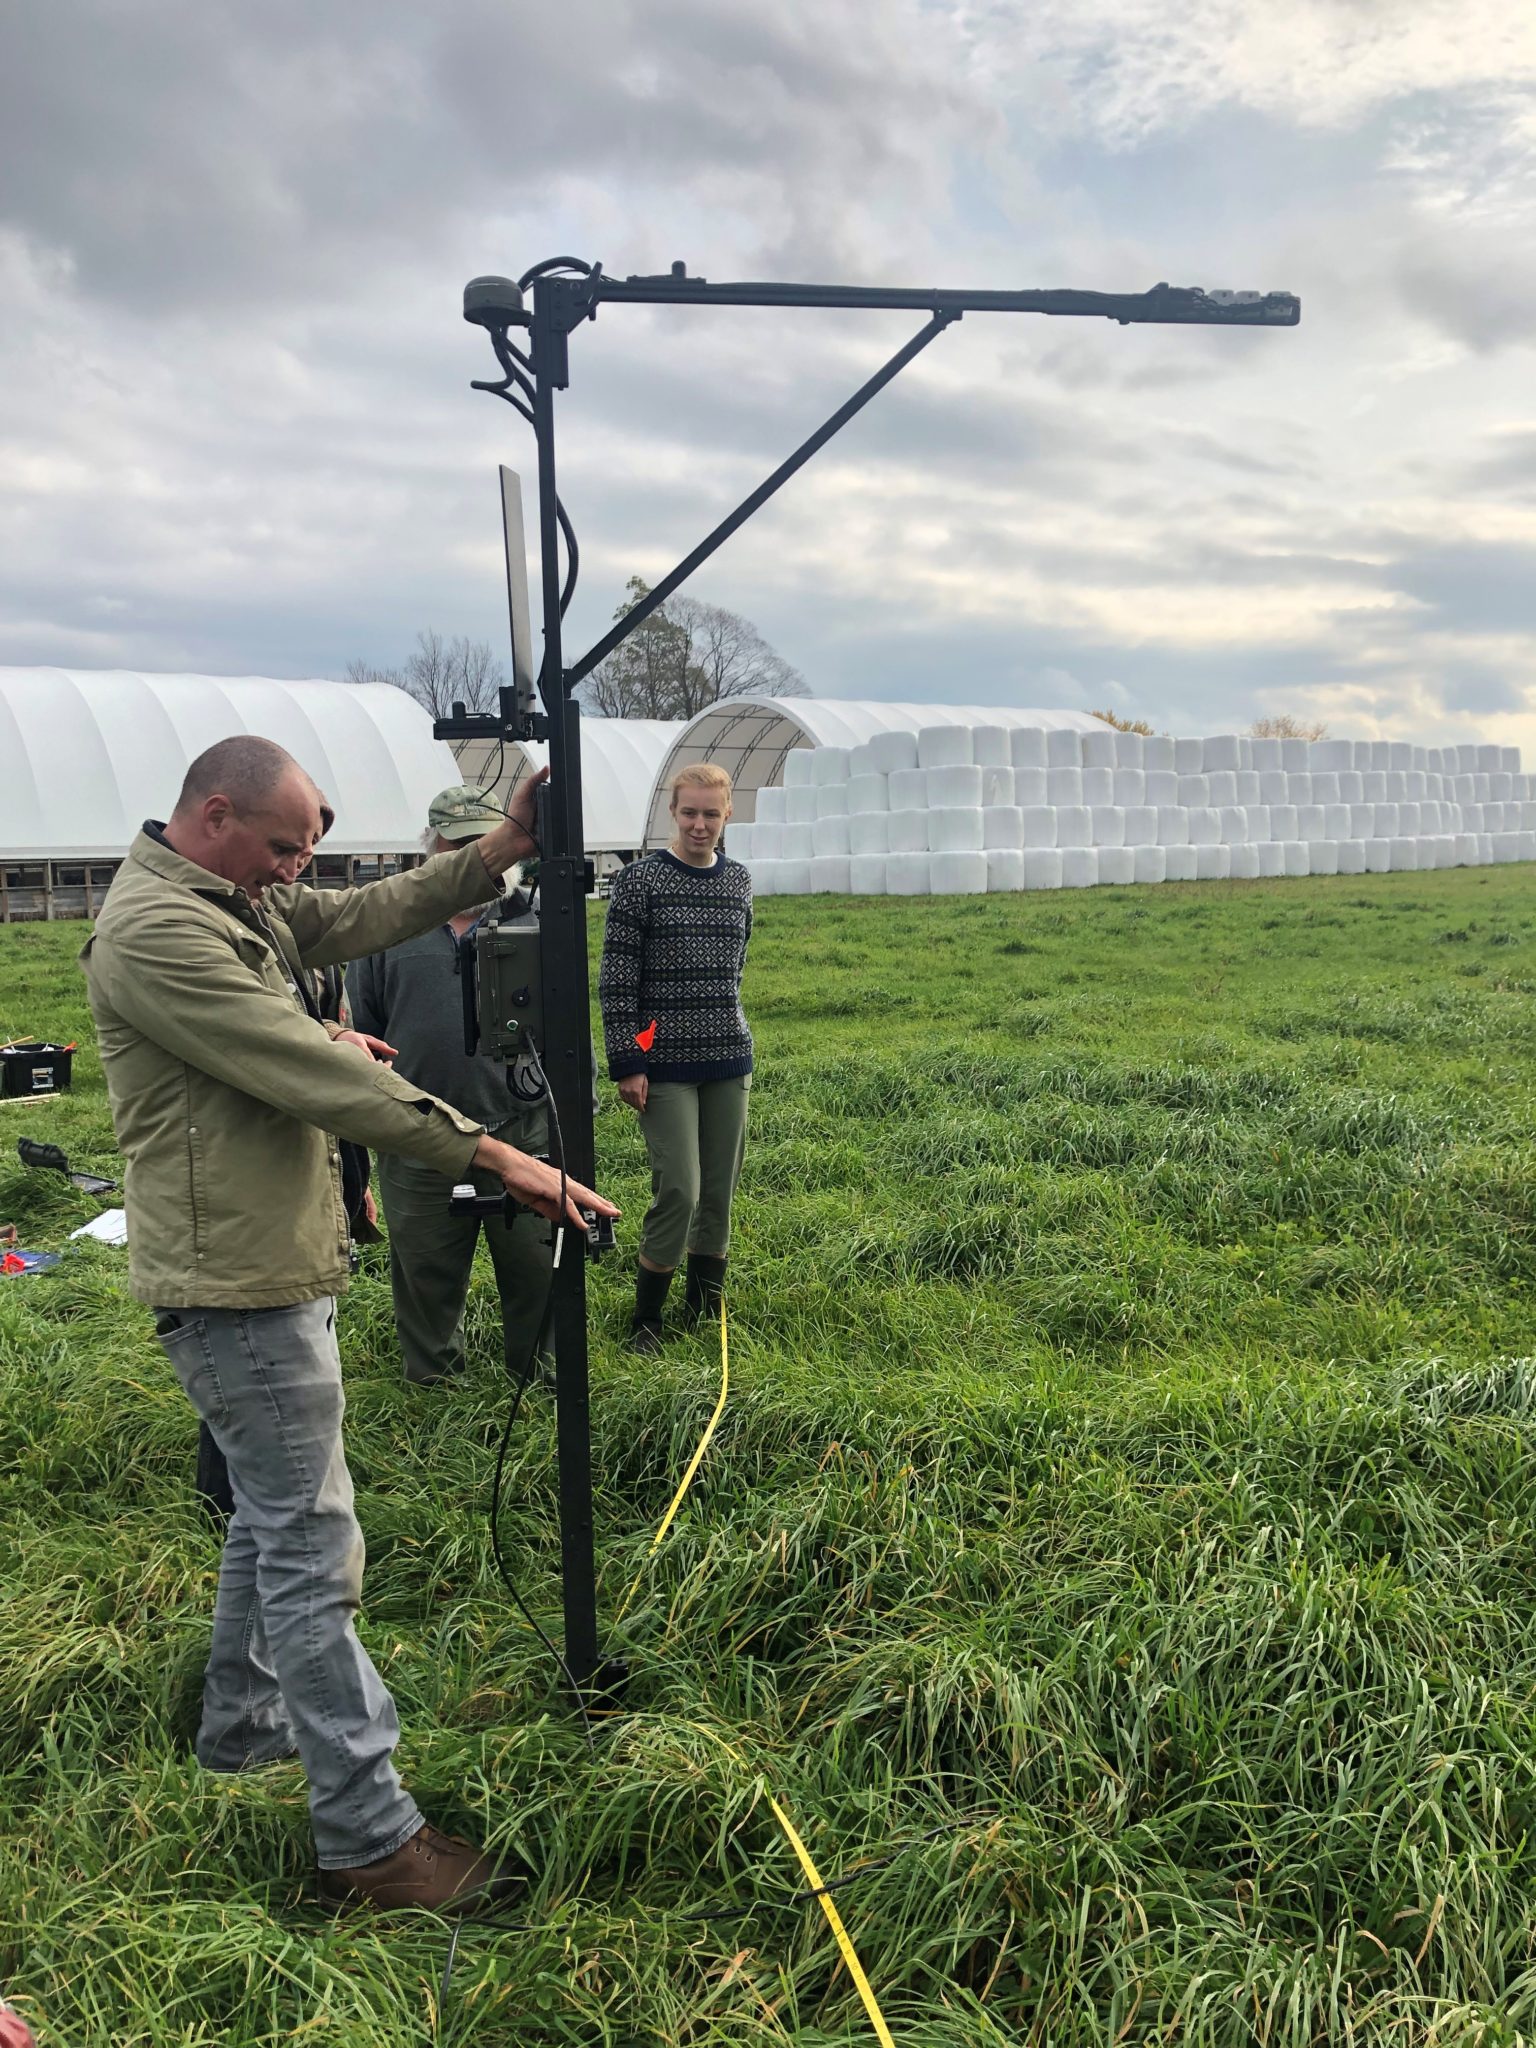 Abe Collins, an advocate of contracting farmers to create measurable improvements in ecosystem services, demonstrates a measurement tool he calls “the Grazibrator” on Choiniere Family Farm in Hiighgate. 